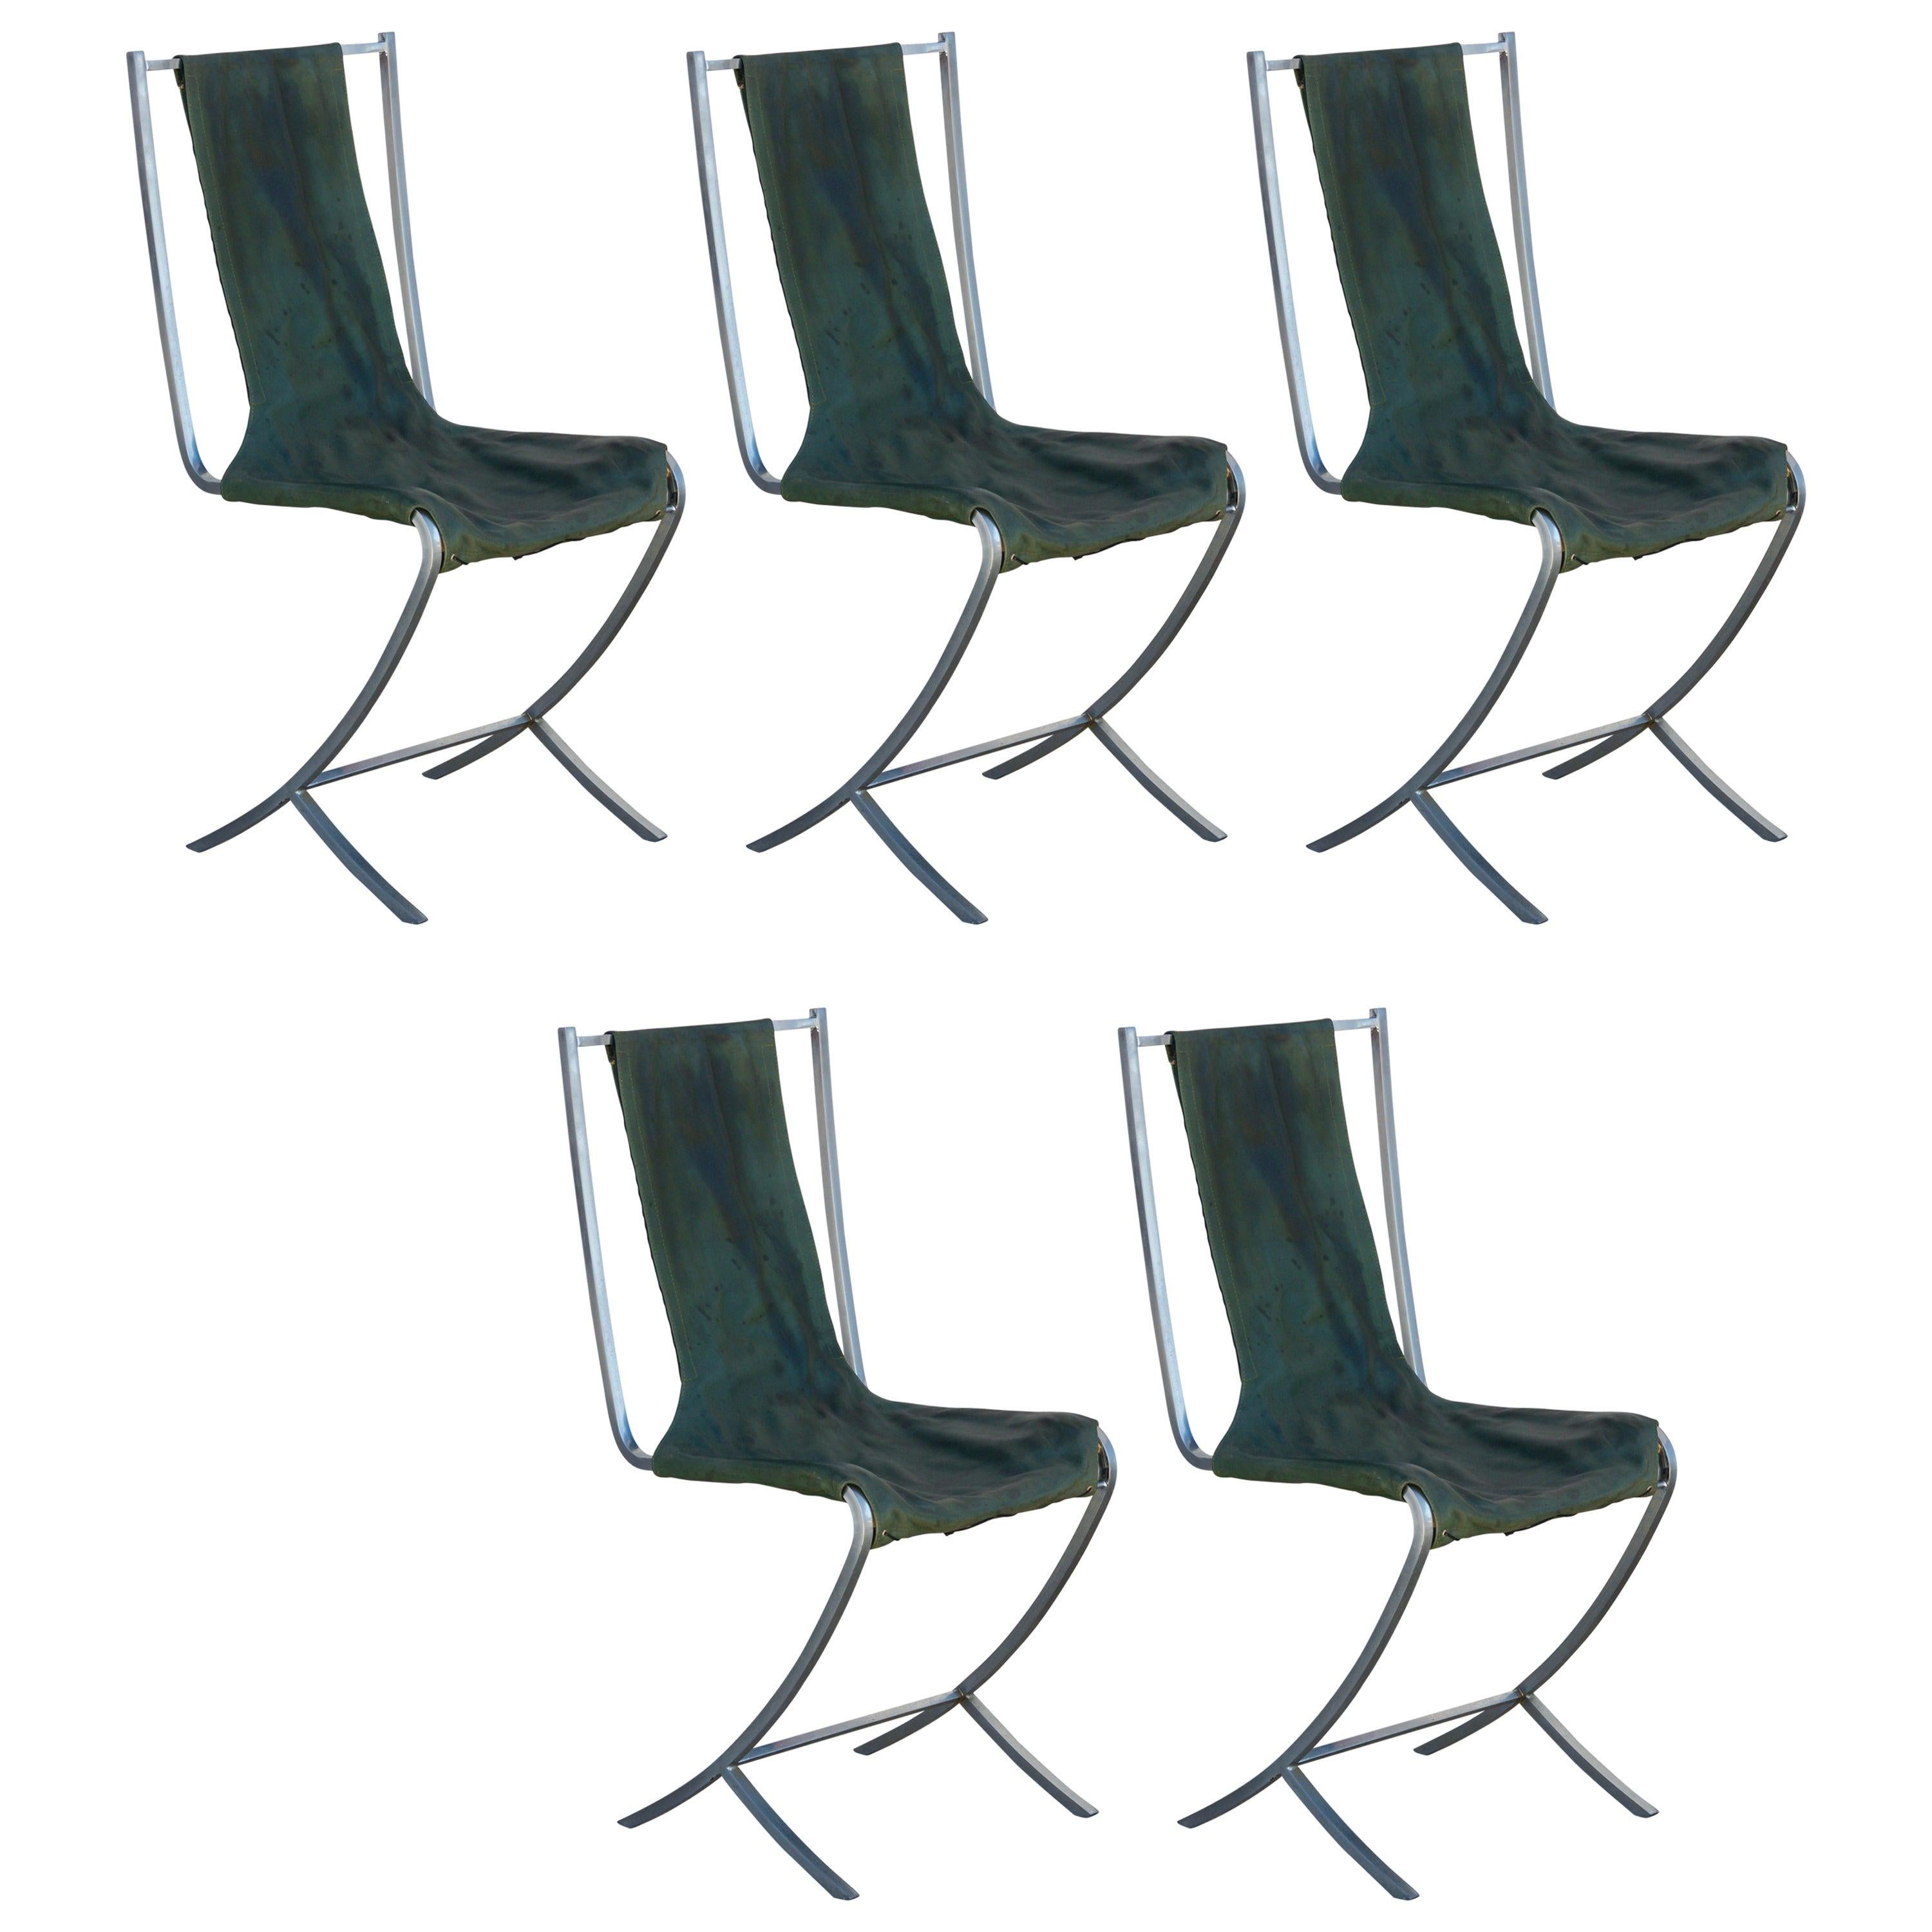 Rare Set of Five Stainless Steel Chairs by Maison Jansen For Sale